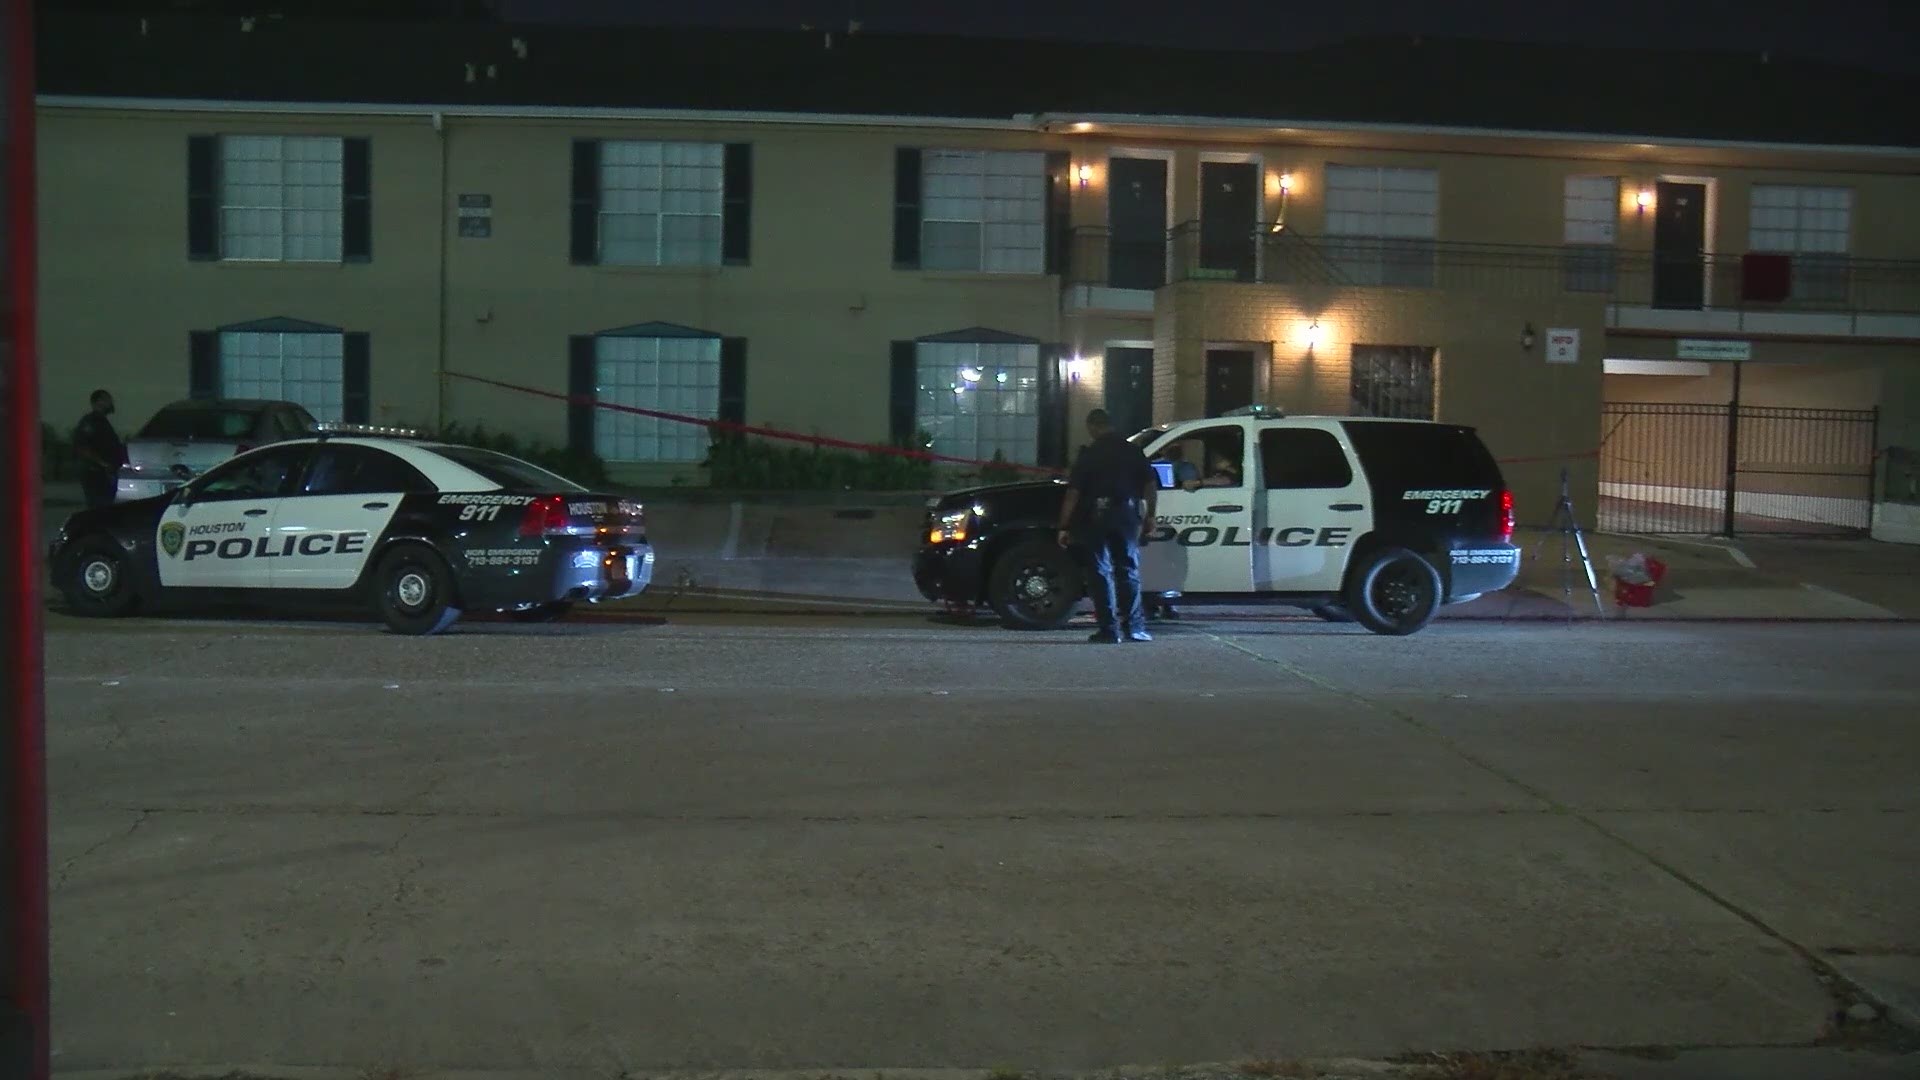 Houston police said they found a "substantial amount" of blood outside an apartment near Meyerland Park. Police have not found a body, but they are questioning a person of interest.